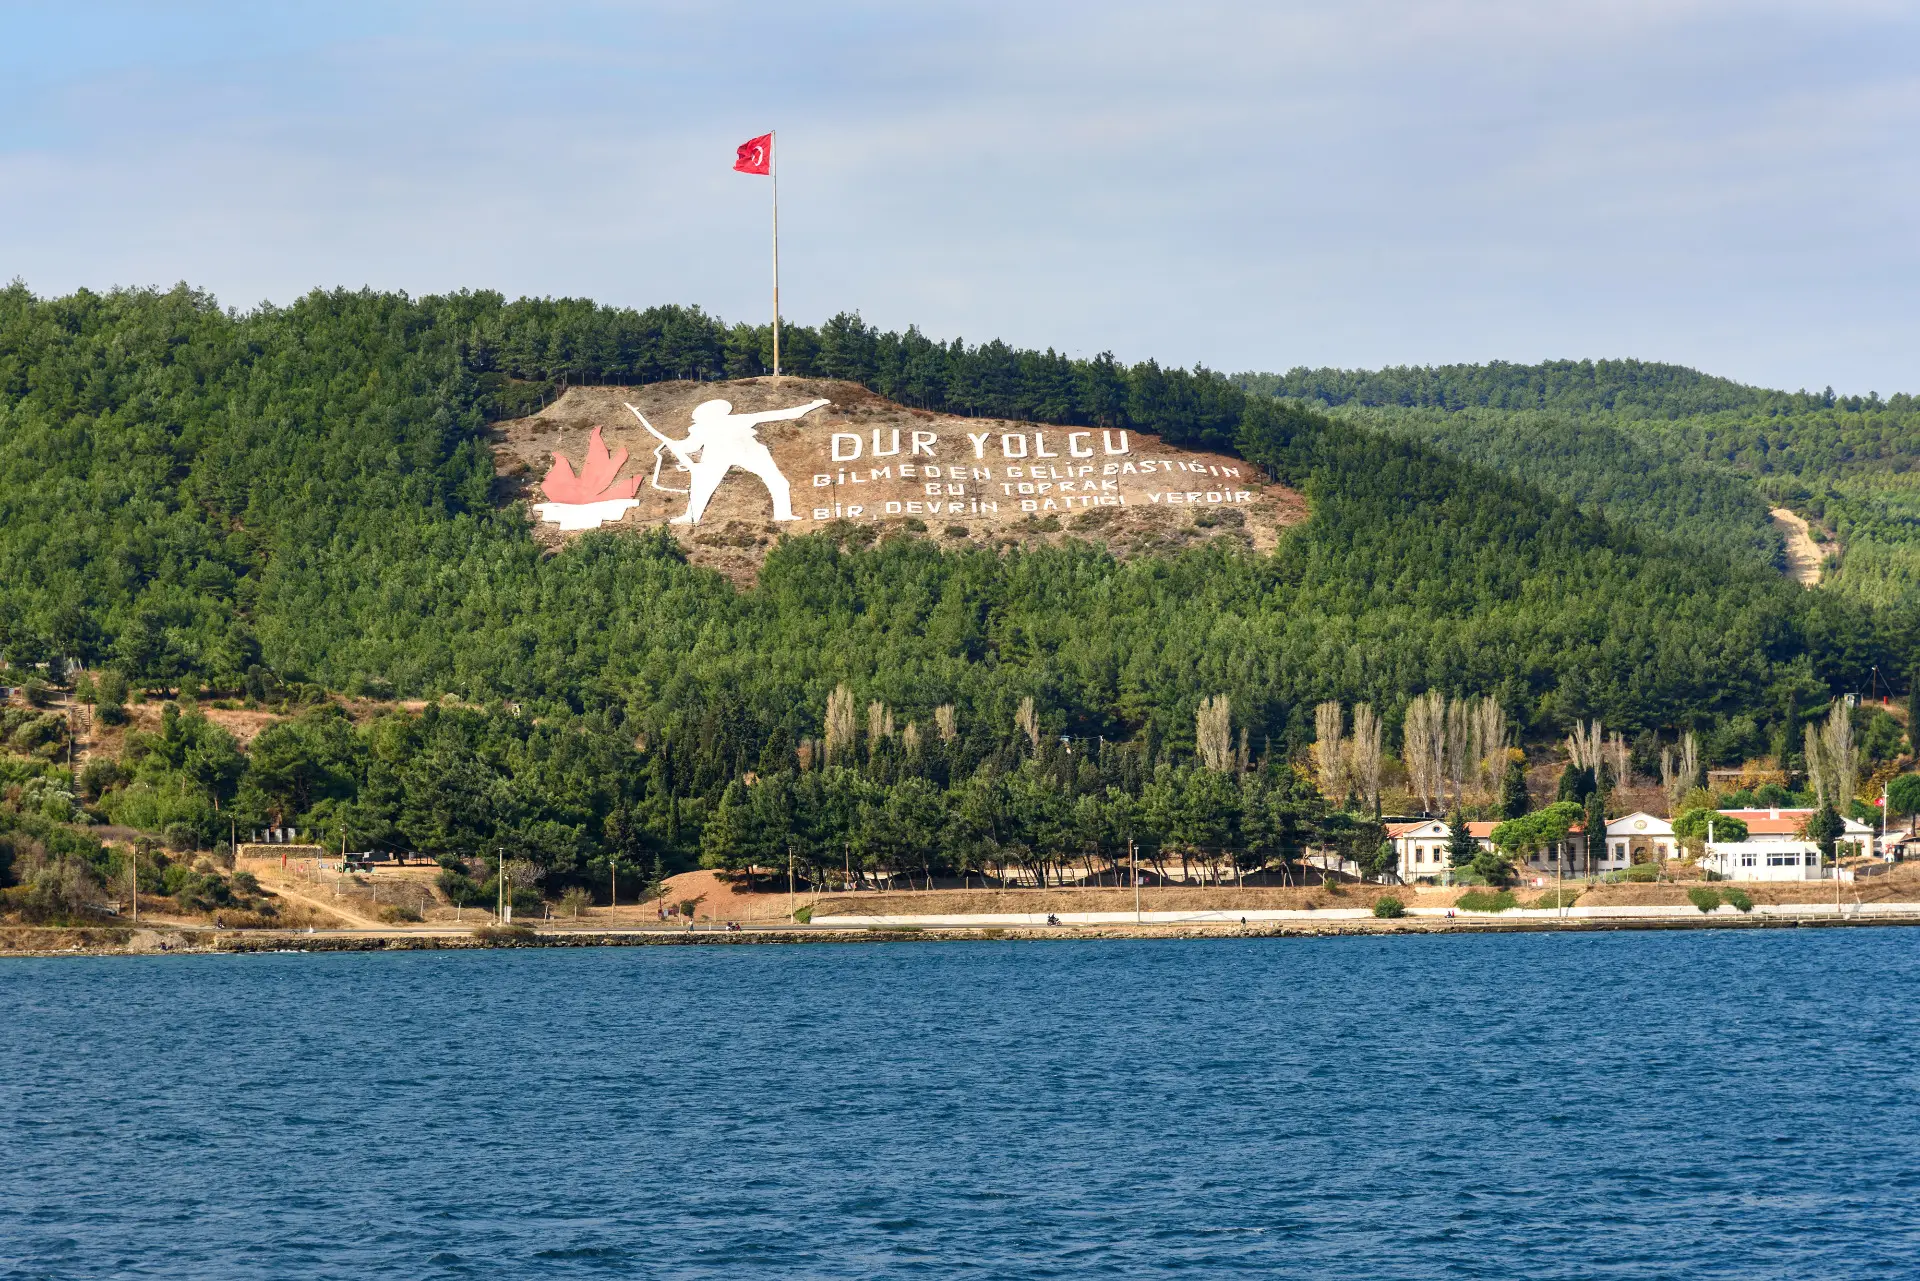 Çanakkale Travel Guide: What to Do? Where to Eat?